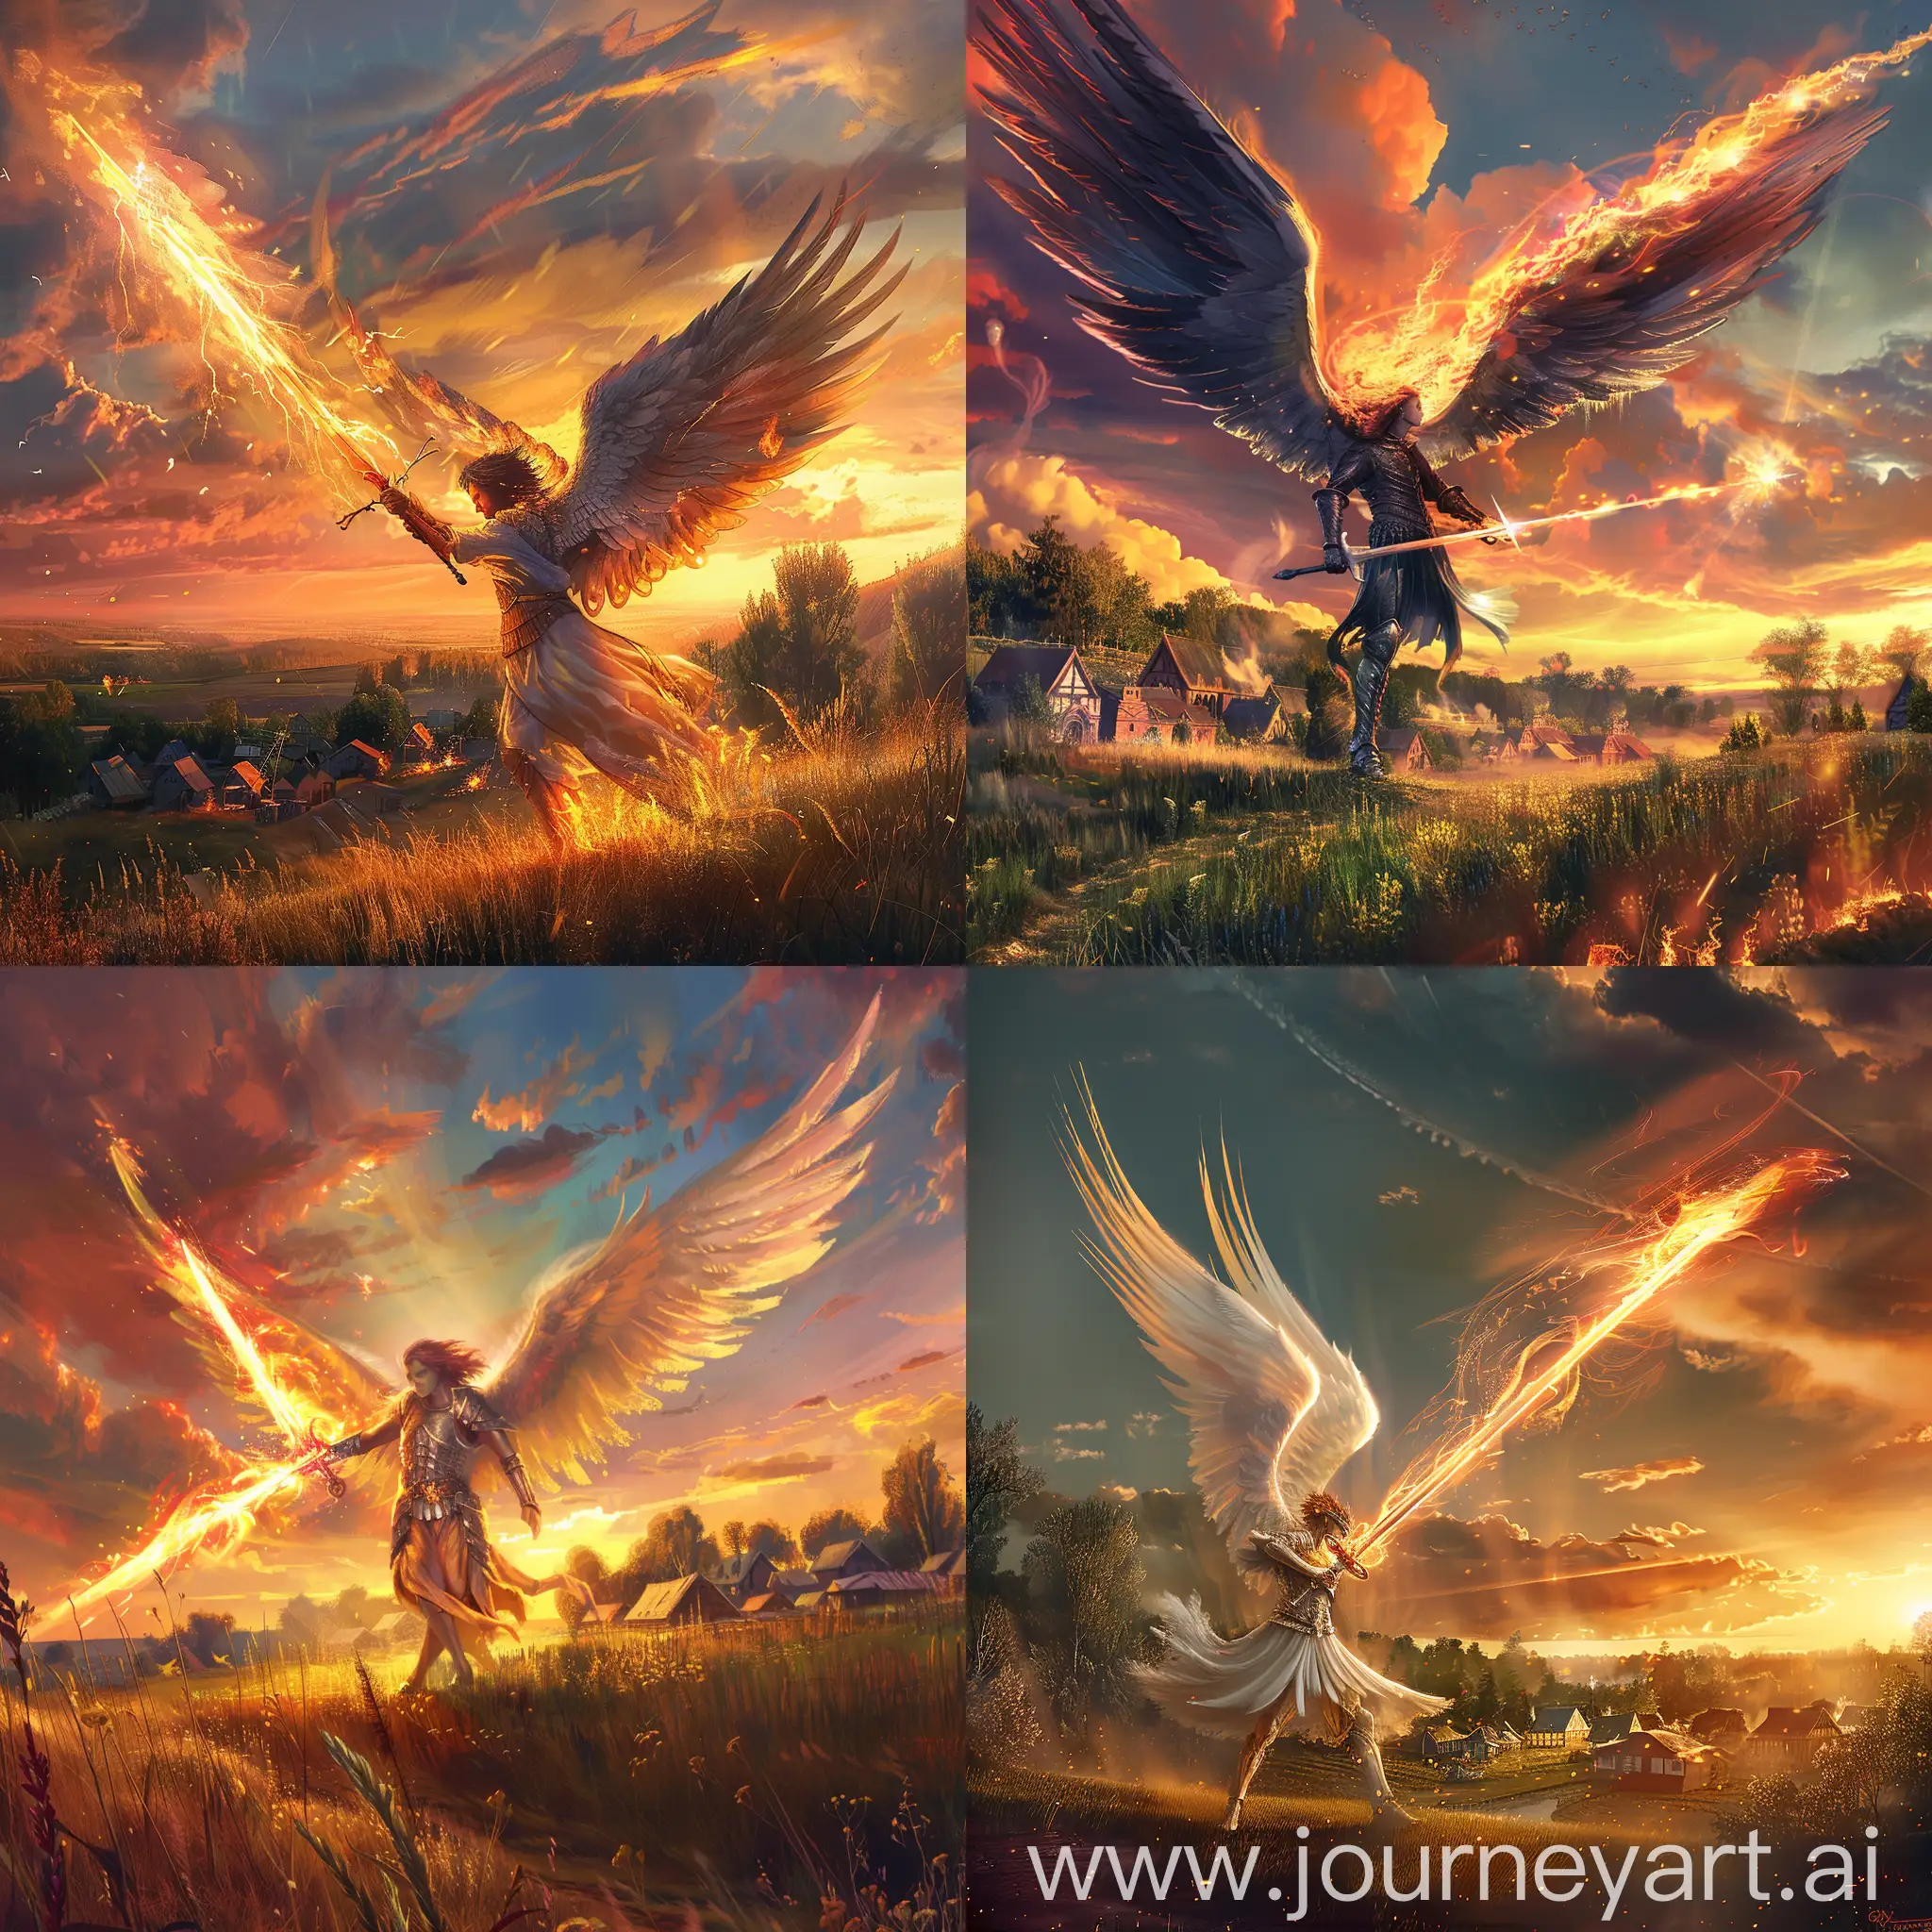 Angel-Descending-with-Fiery-Sword-at-Twilight-over-Village